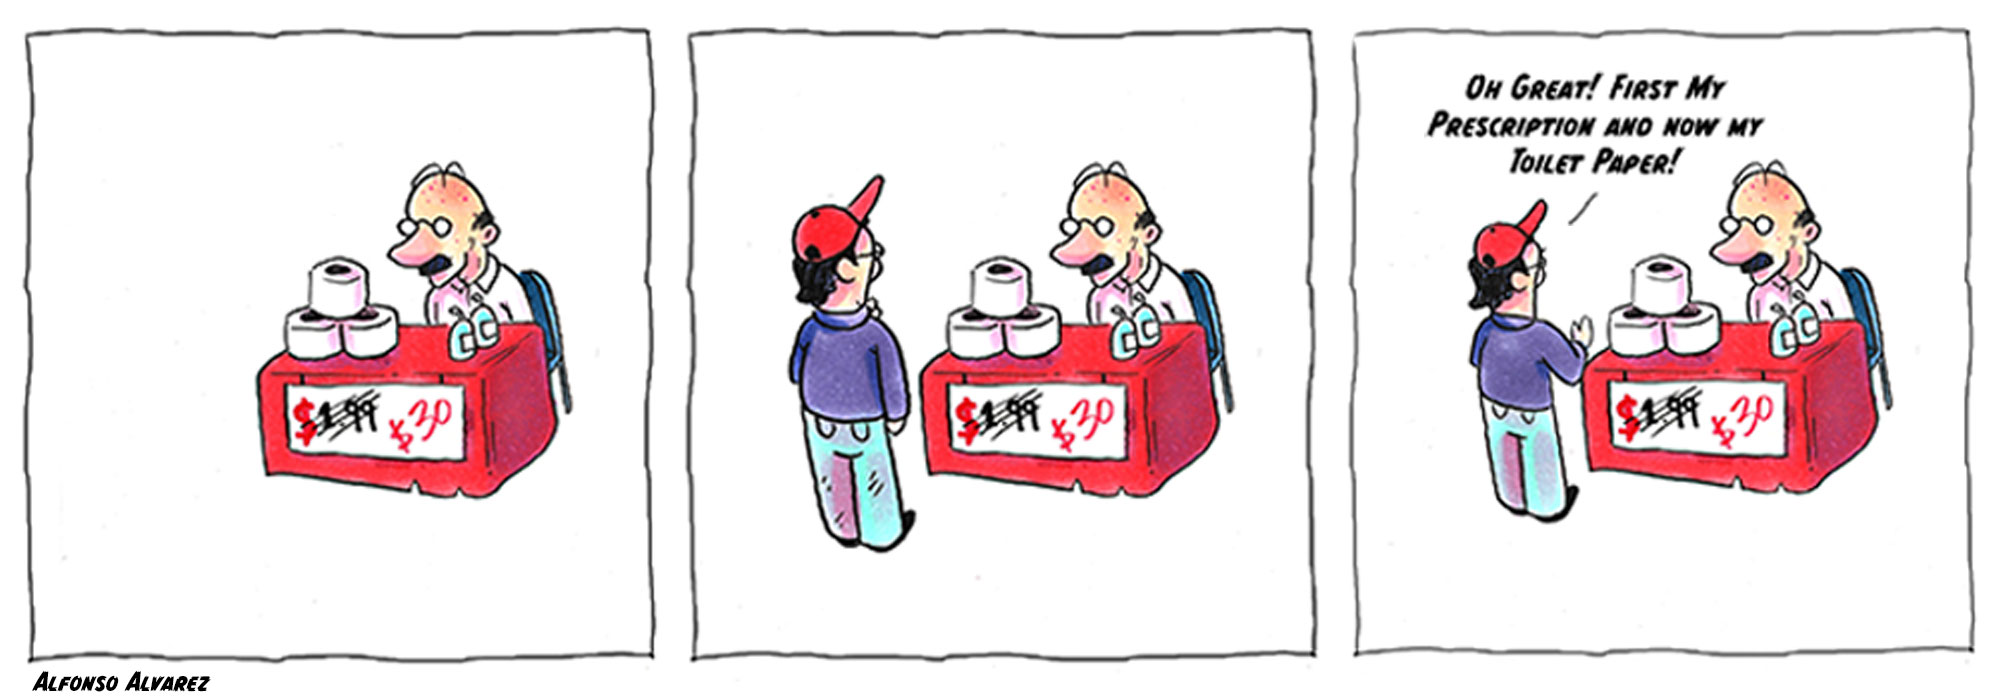 An illustrative comic depiction an individual price gouging toilet paper and hand sanitizer. A man walks up and complains about the same thing happening to his prescription. Cartoon by The Signal reporter, Alfonso Alvarez.